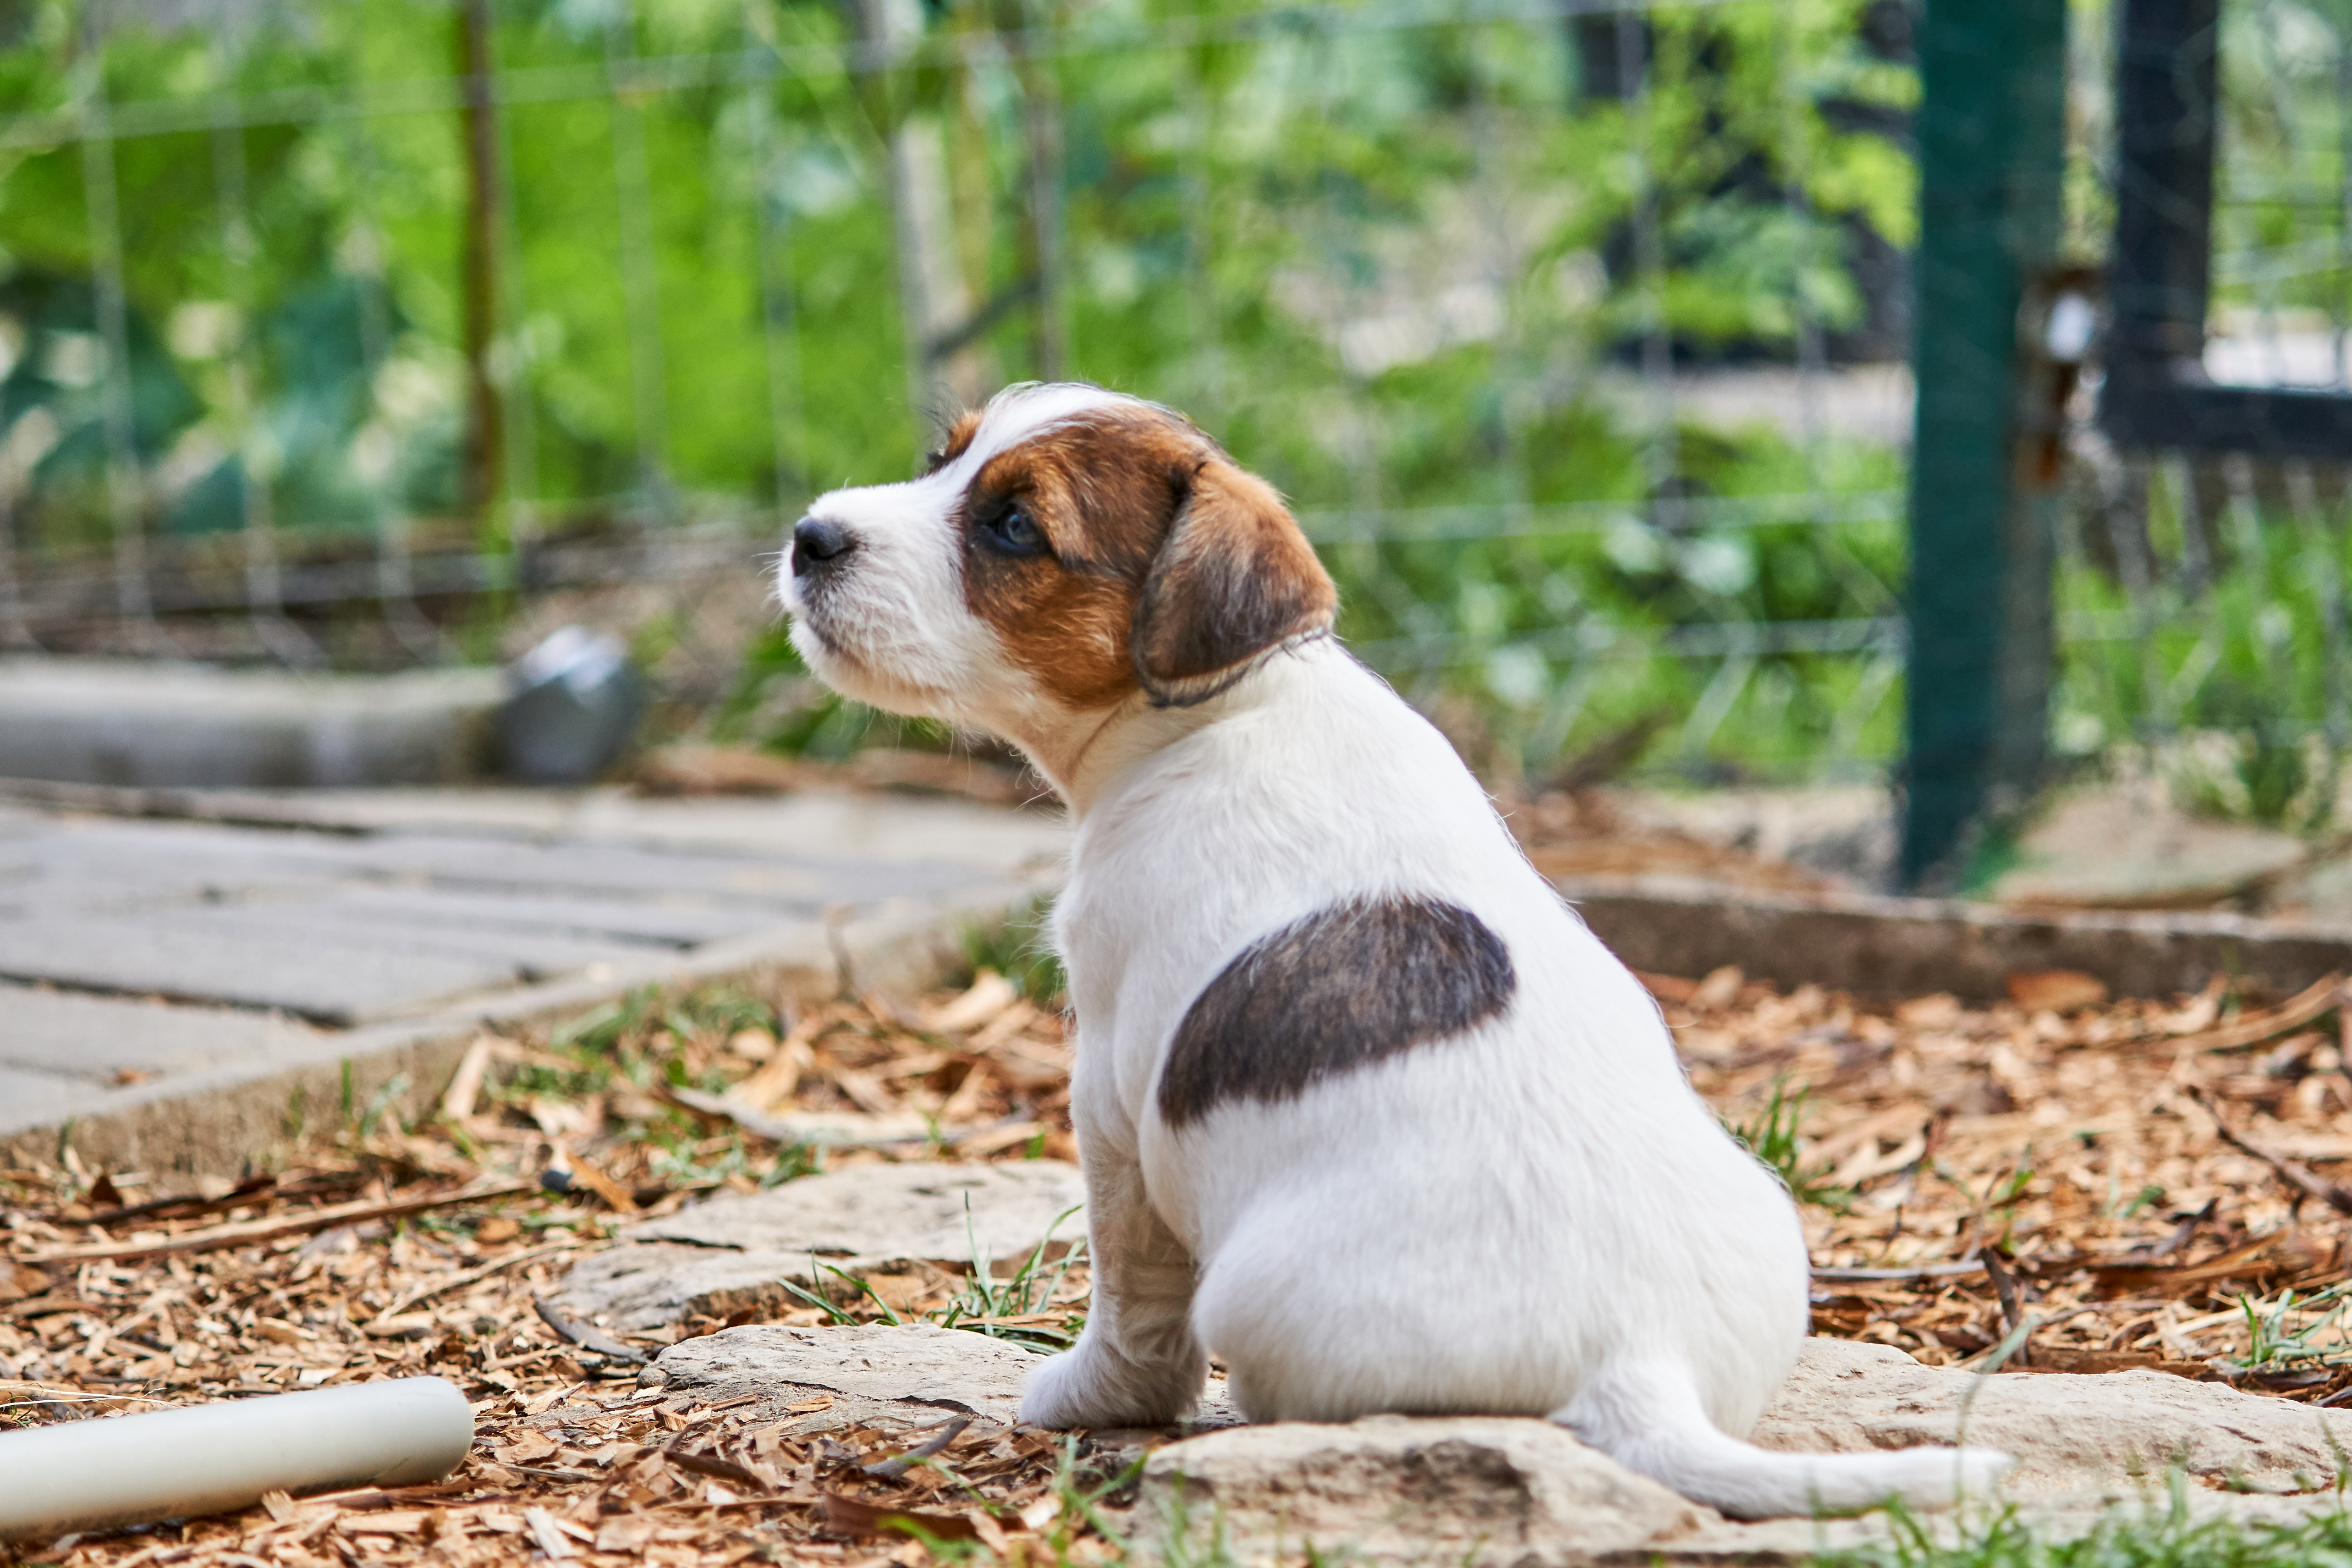 Pictures Of Jack Russell Terrier Puppies